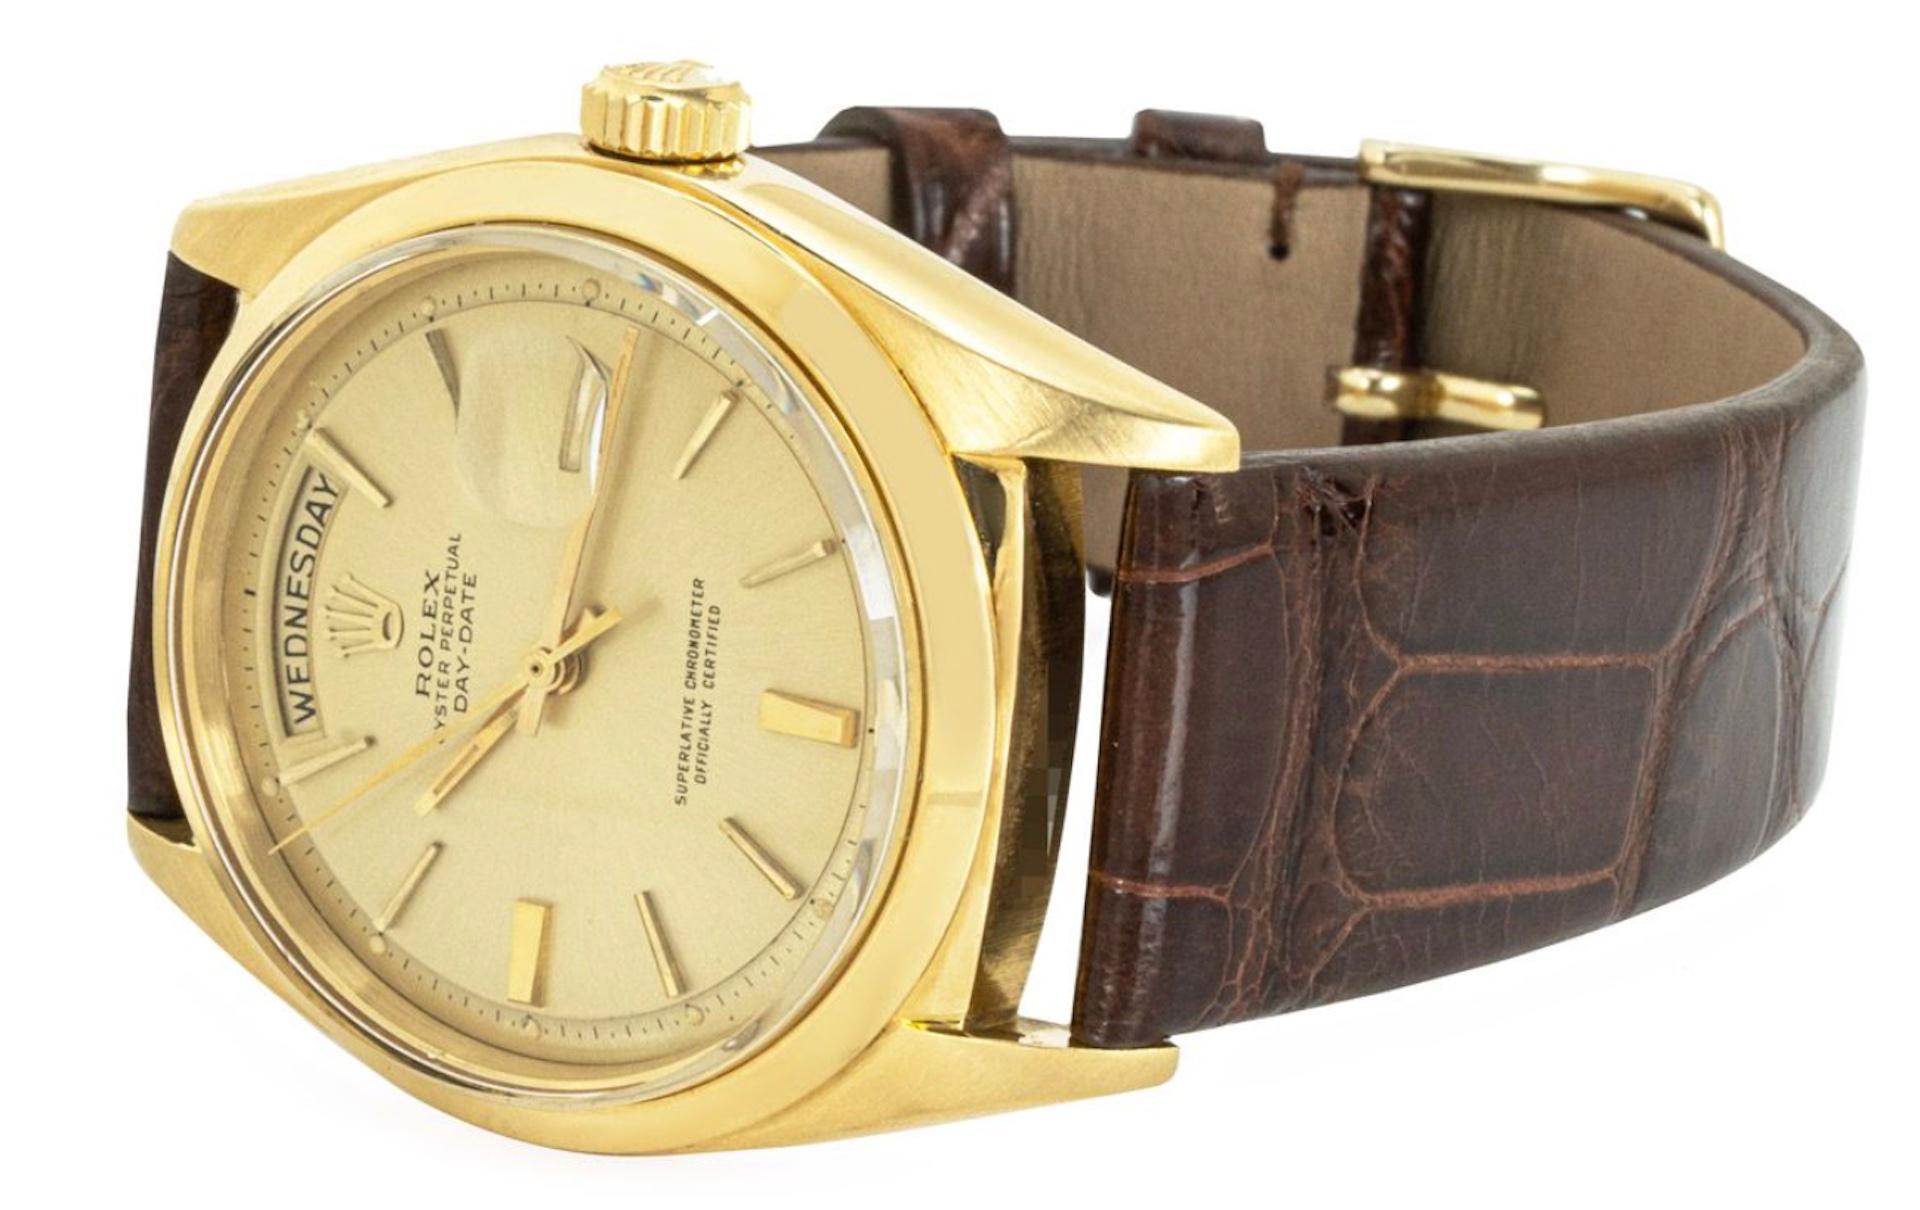 Vintage Rolex Day-Date Yellow Gold 1802 1